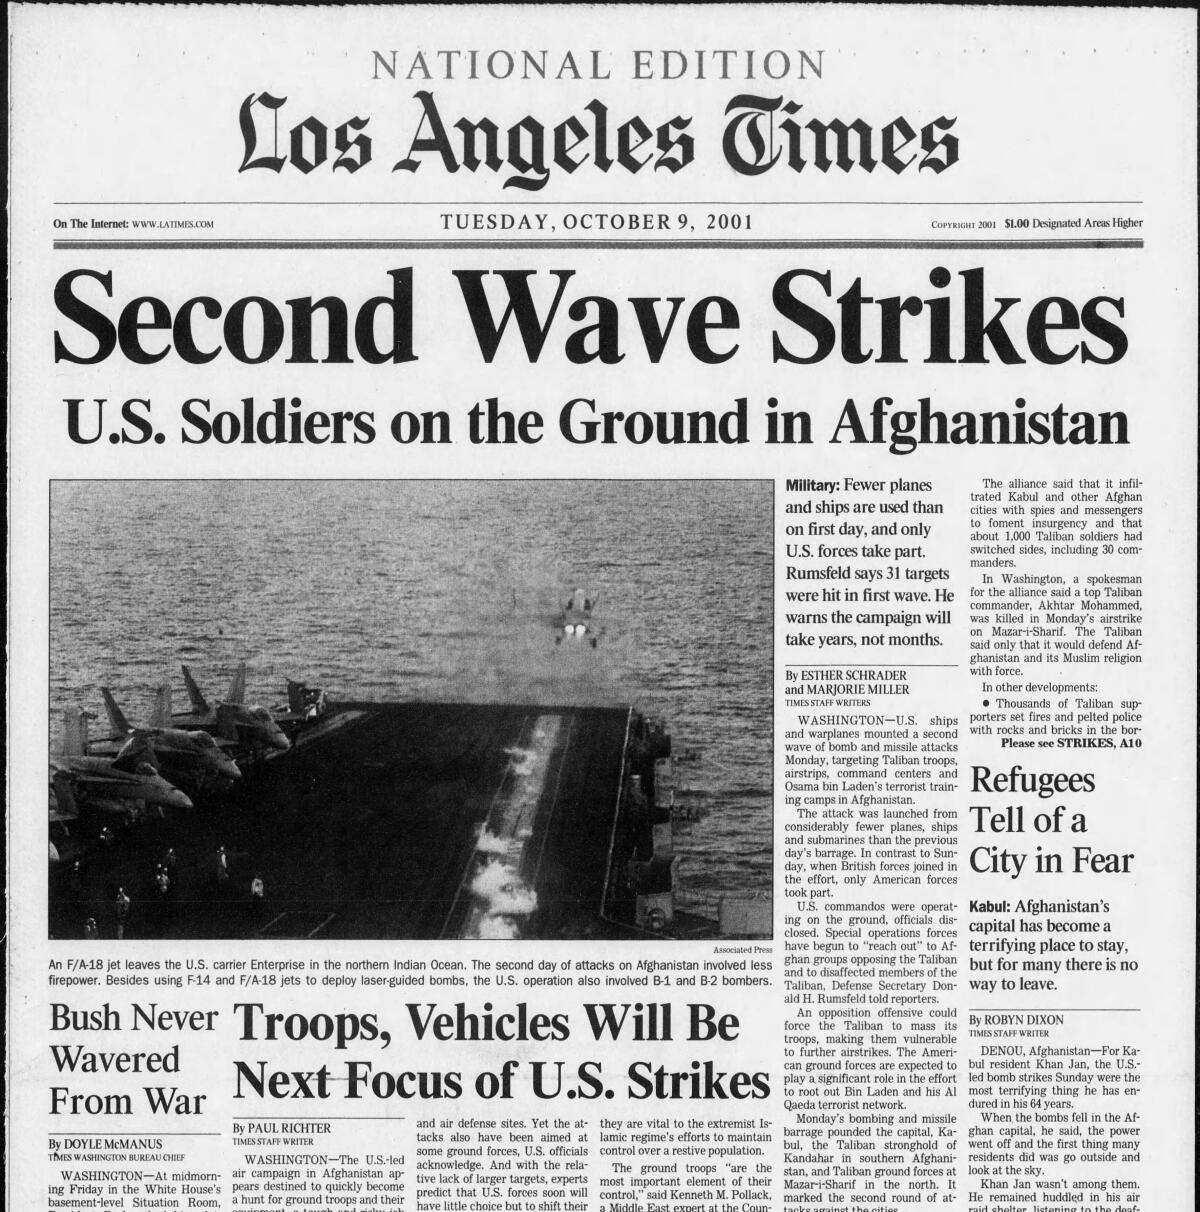 A newspaper headline reads "Second wave strikes; U.S. soldiers on the ground in Afghanistan."